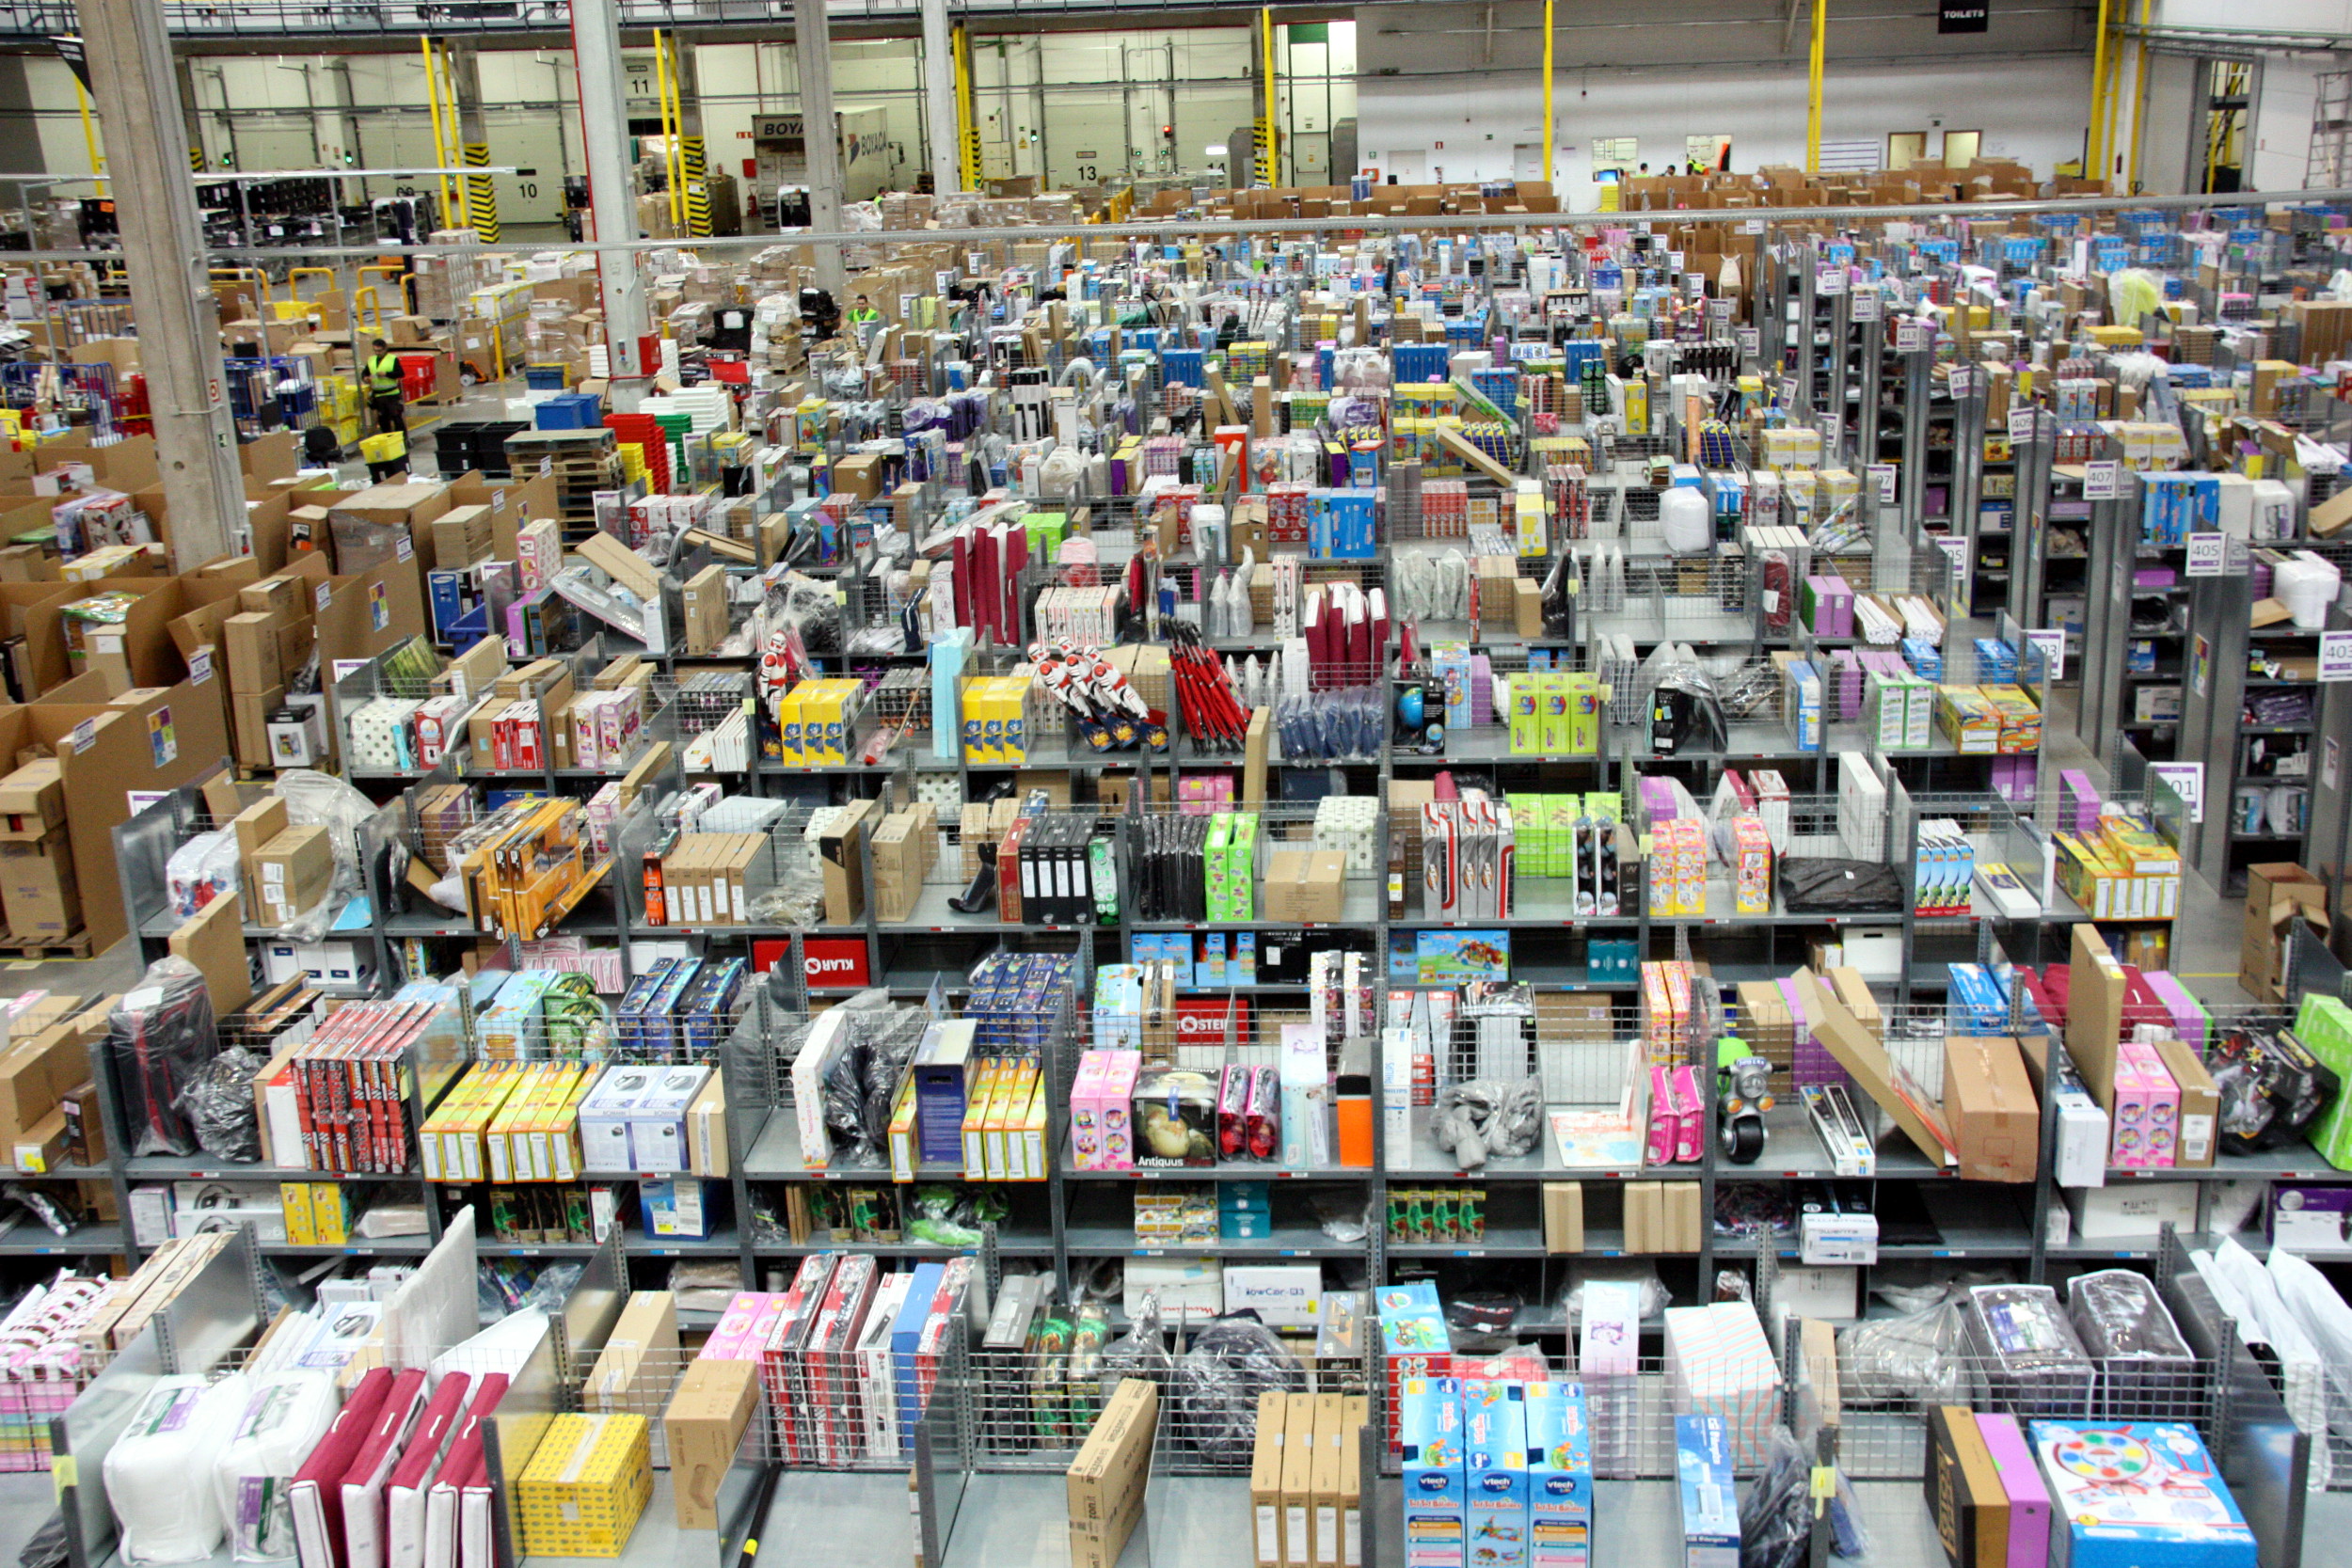 Image of Amazon's Logistics Centre in Madrid (by ACN)